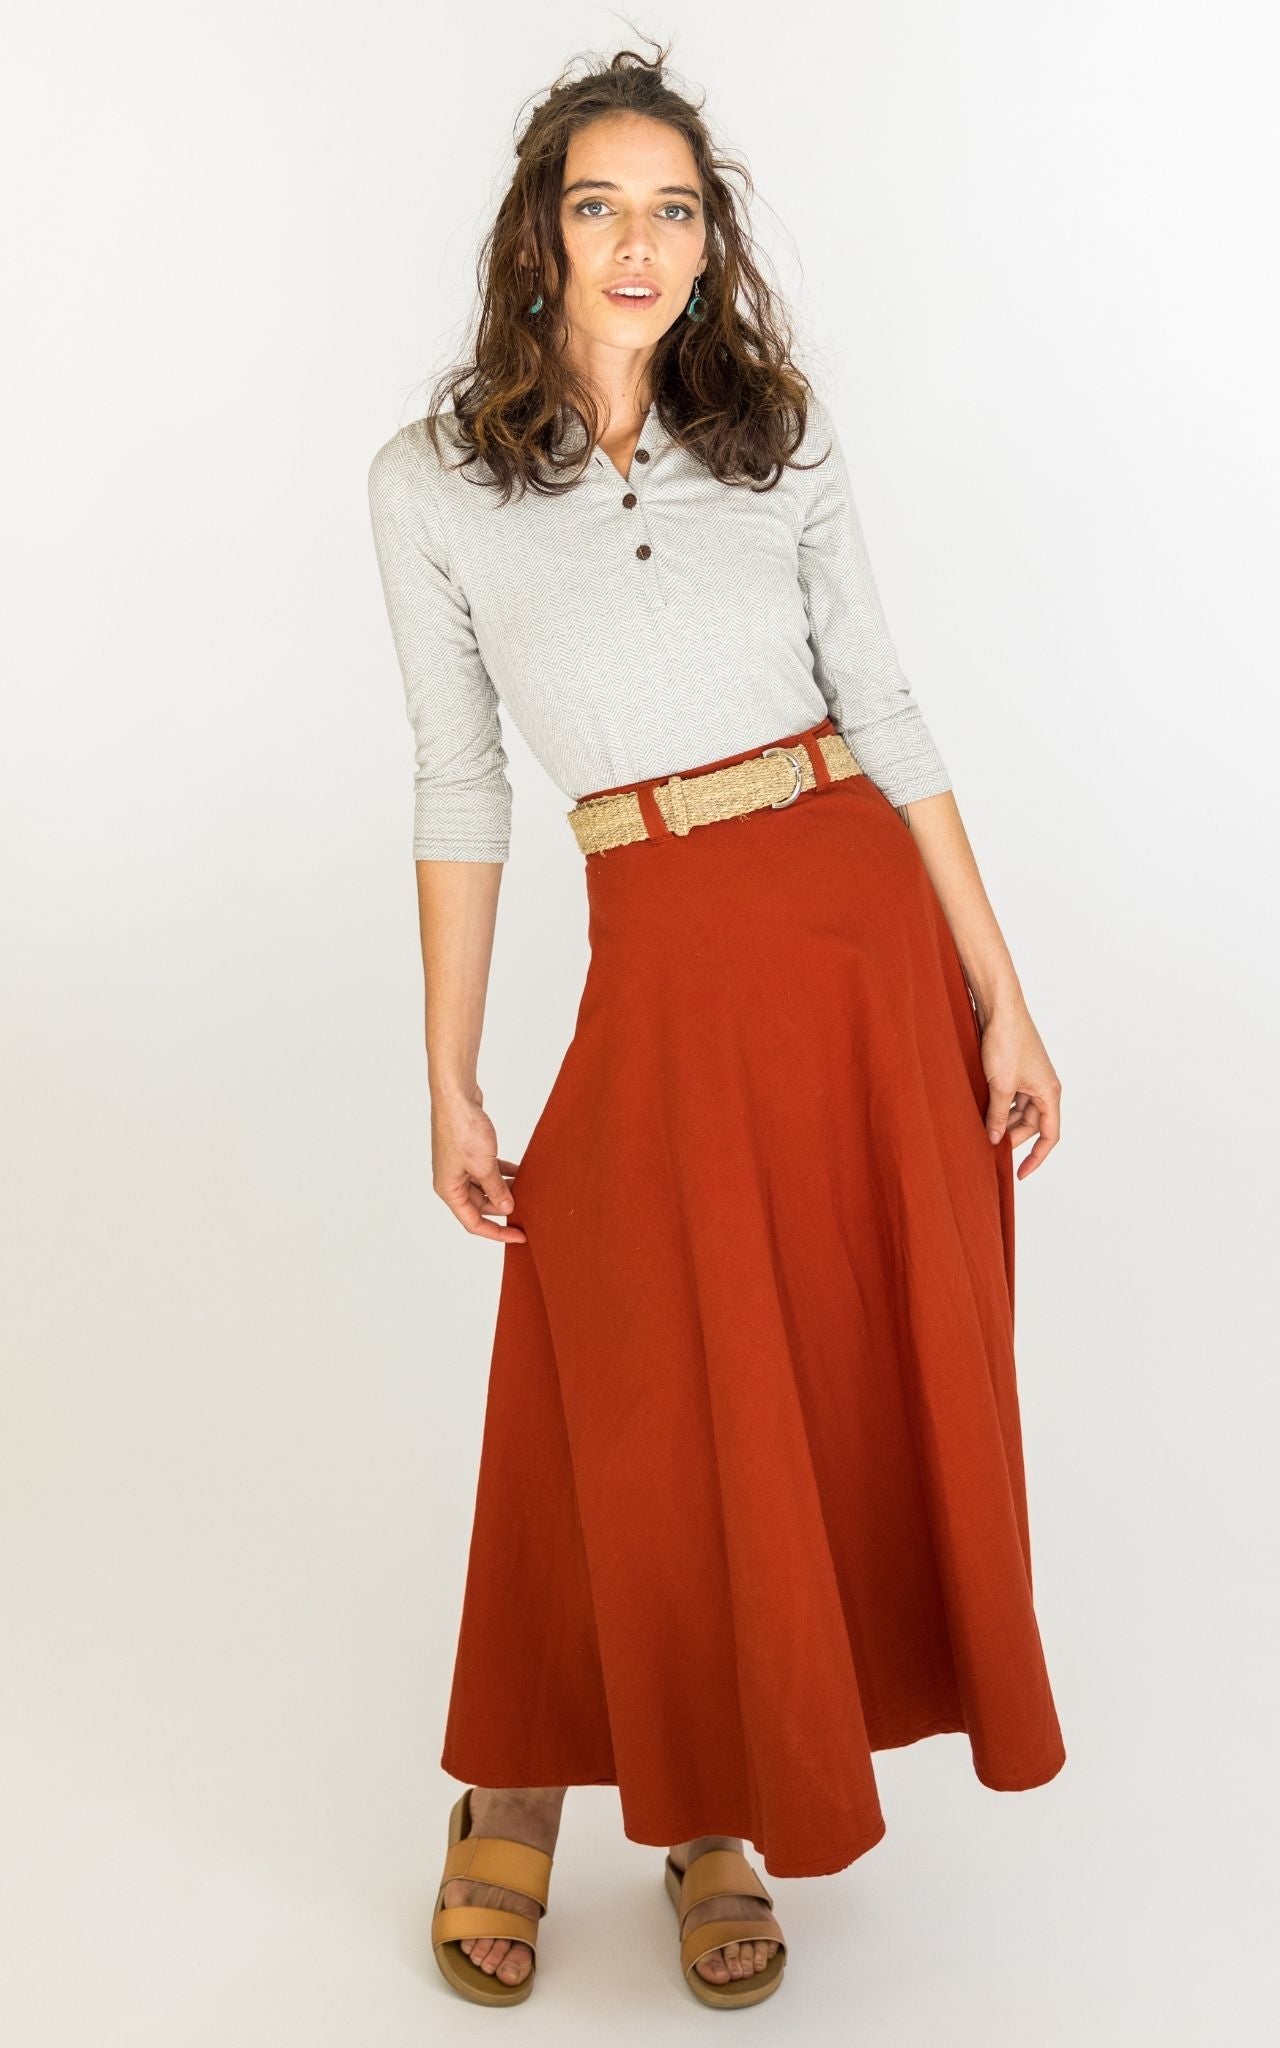 Surya Australia Ethical Cotton Wrap Skirt made in Nepal - Rust